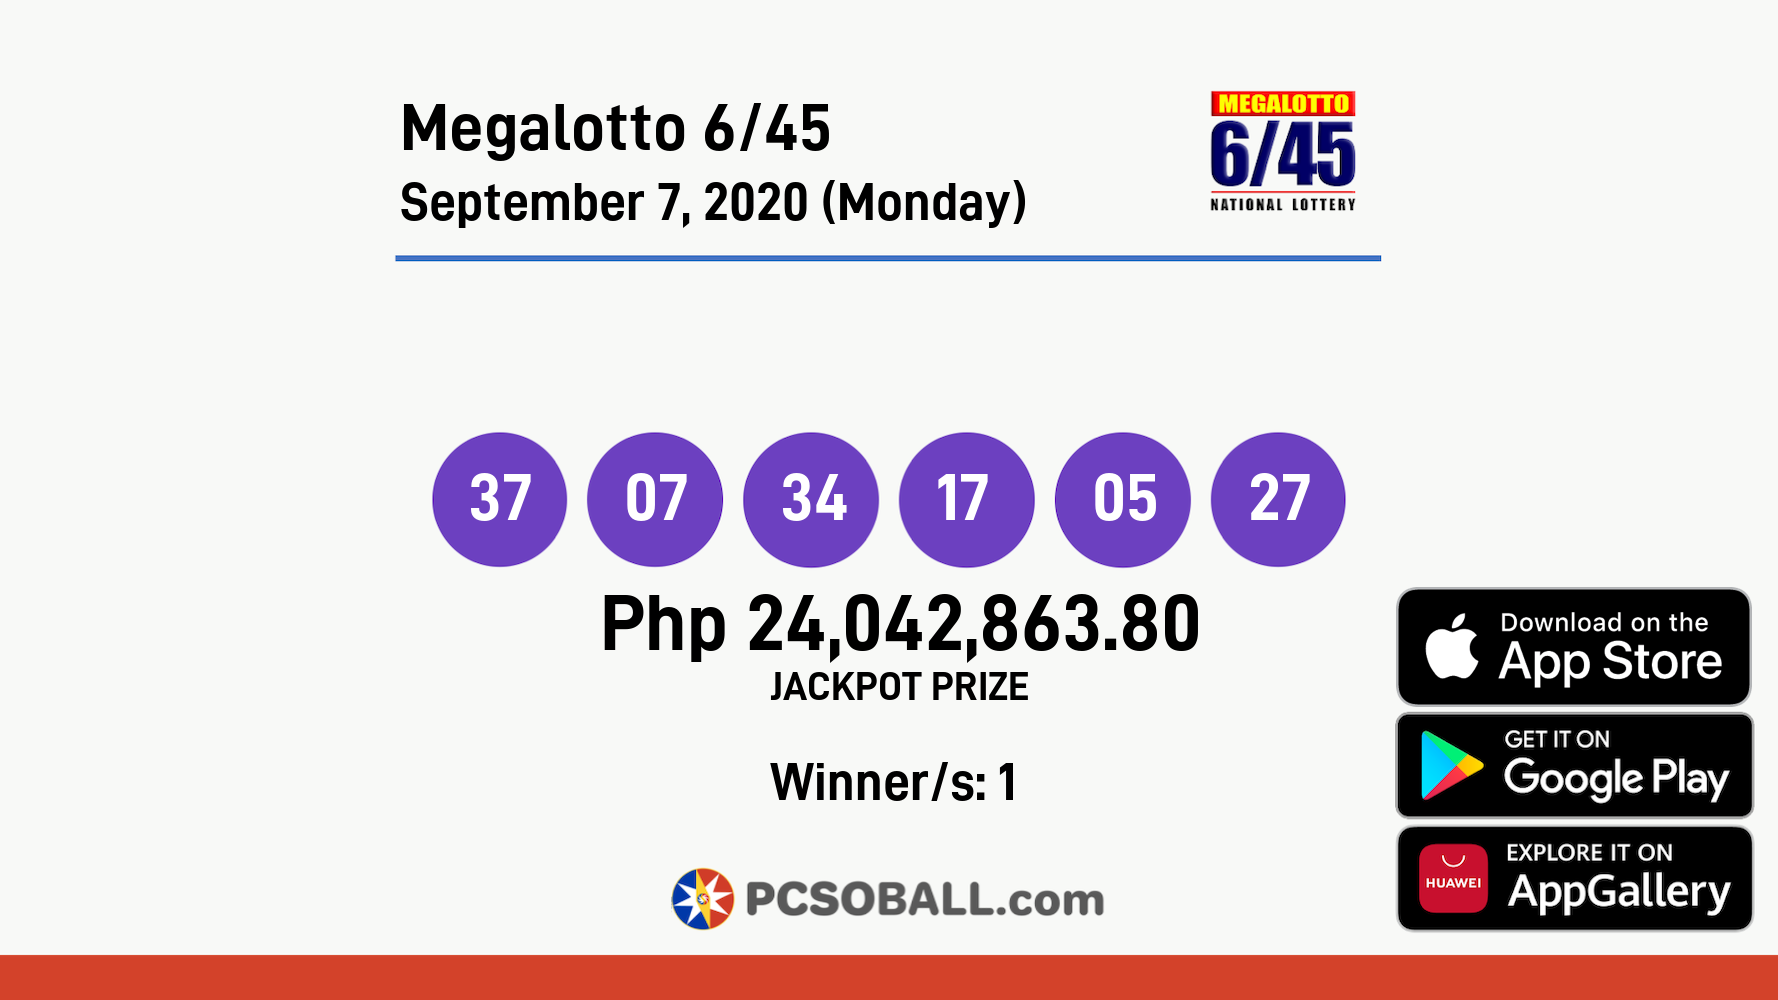 Megalotto 6/45 September 7, 2020 (Monday) Result